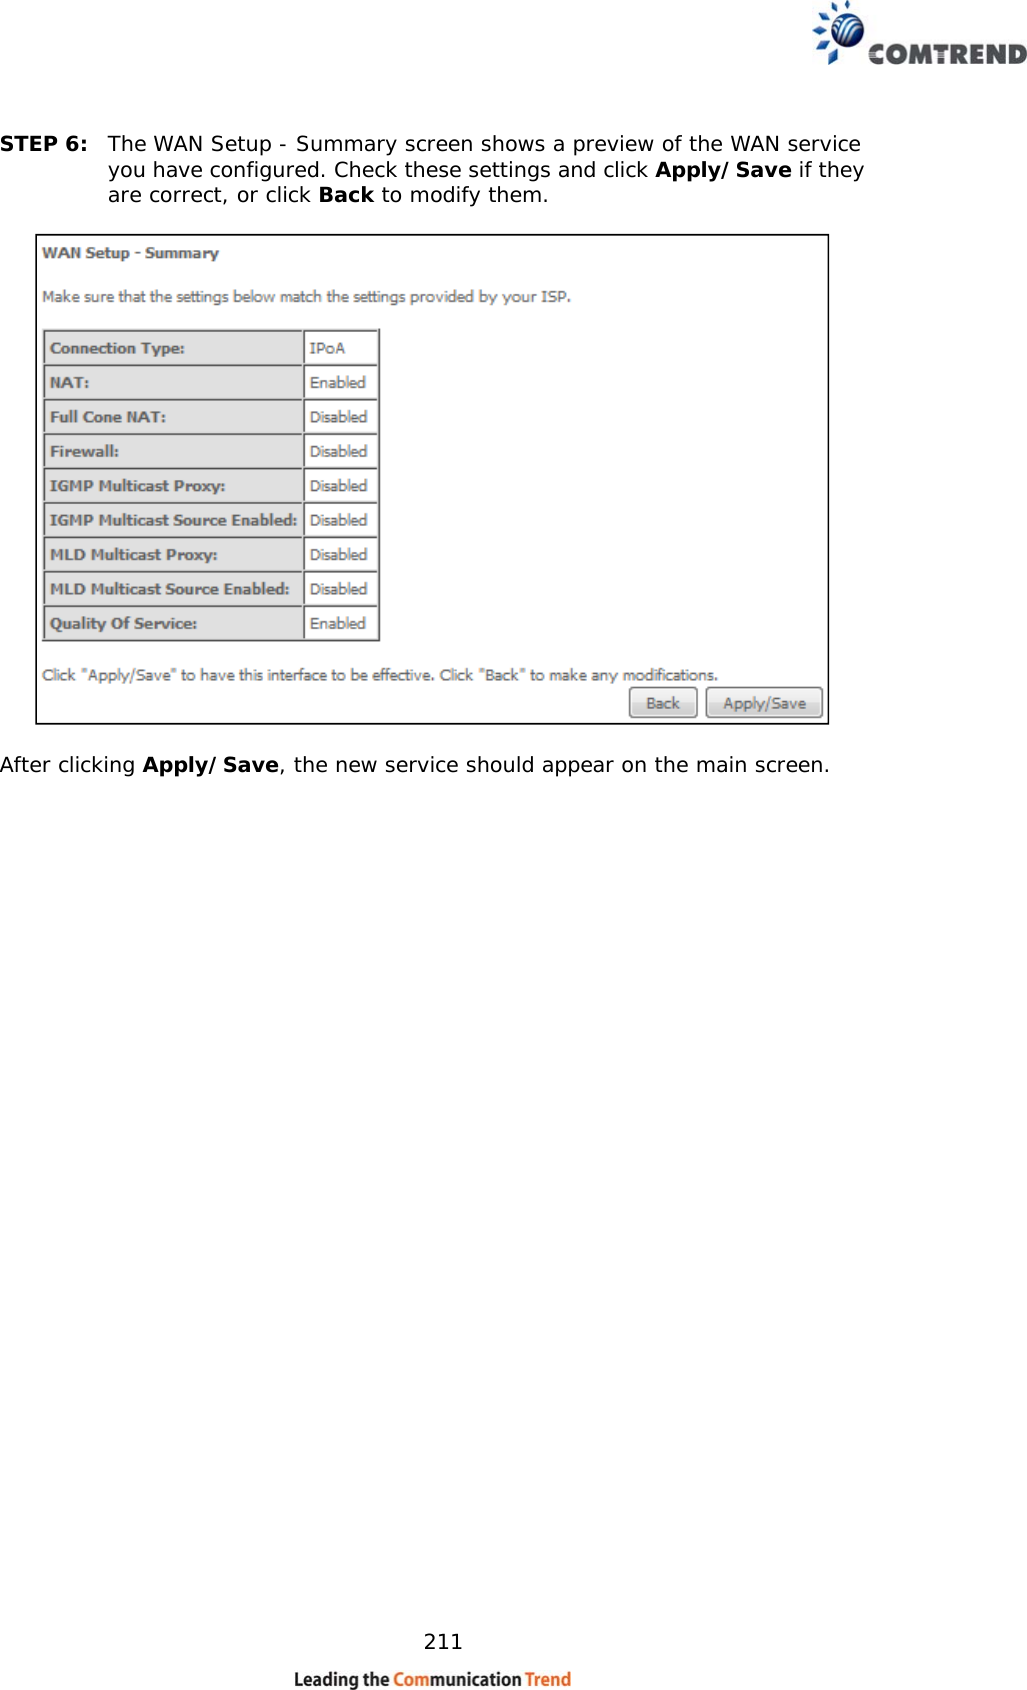    211 STEP 6:  The WAN Setup - Summary screen shows a preview of the WAN service you have configured. Check these settings and click Apply/Save if they are correct, or click Back to modify them.    After clicking Apply/Save, the new service should appear on the main screen.                                